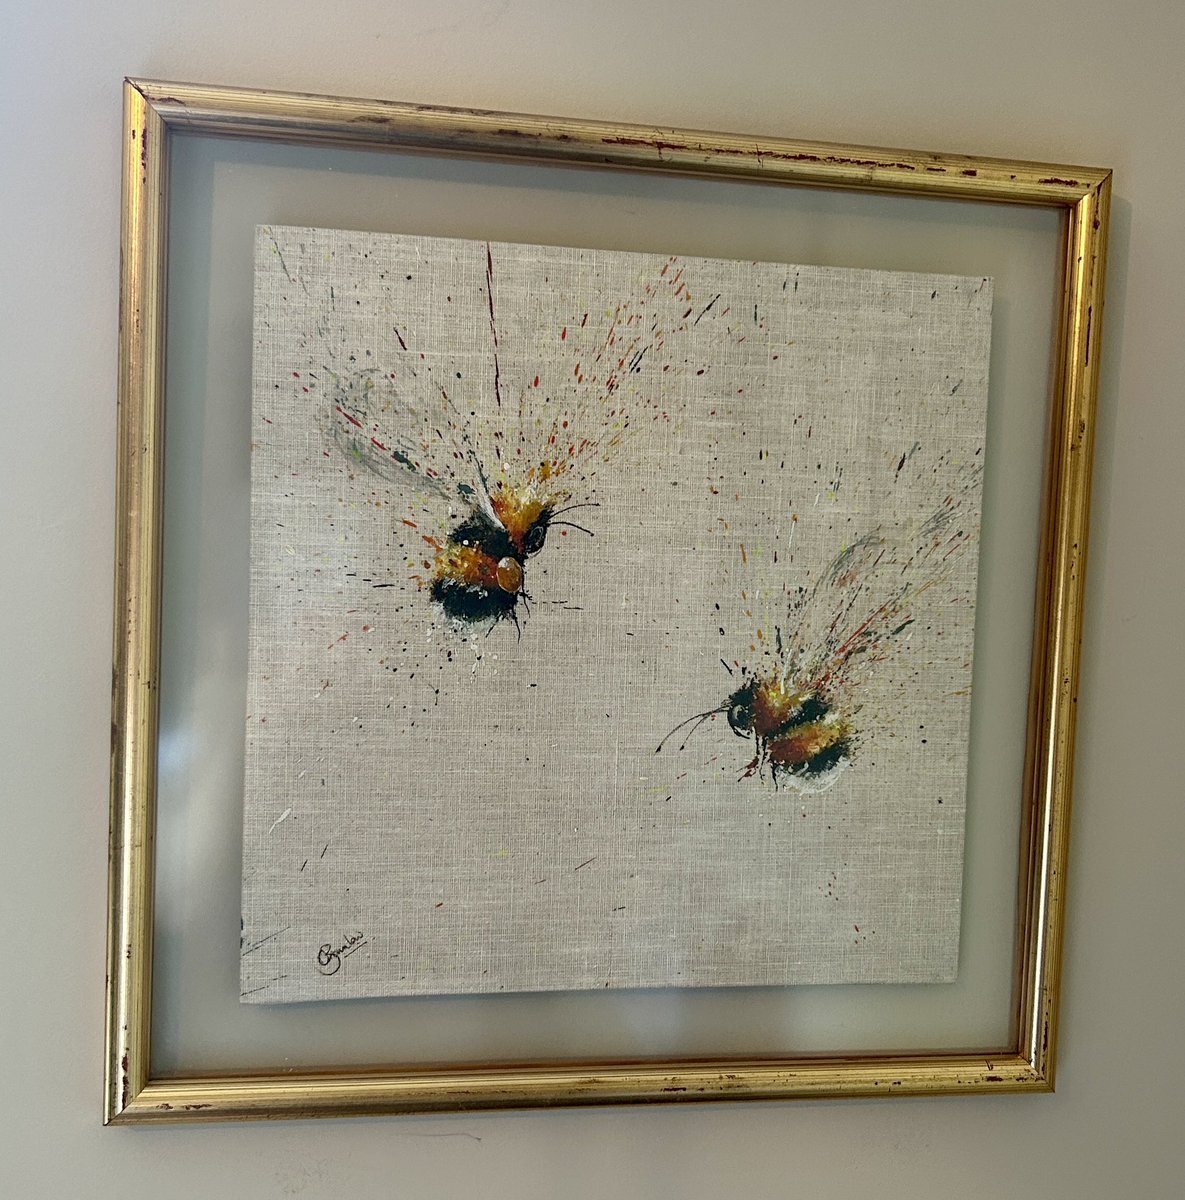 Being a Mancunian you have to love bees 🐝 and today I found the perfect 🐝 painting for my home office from a little local art gallery. Love it!